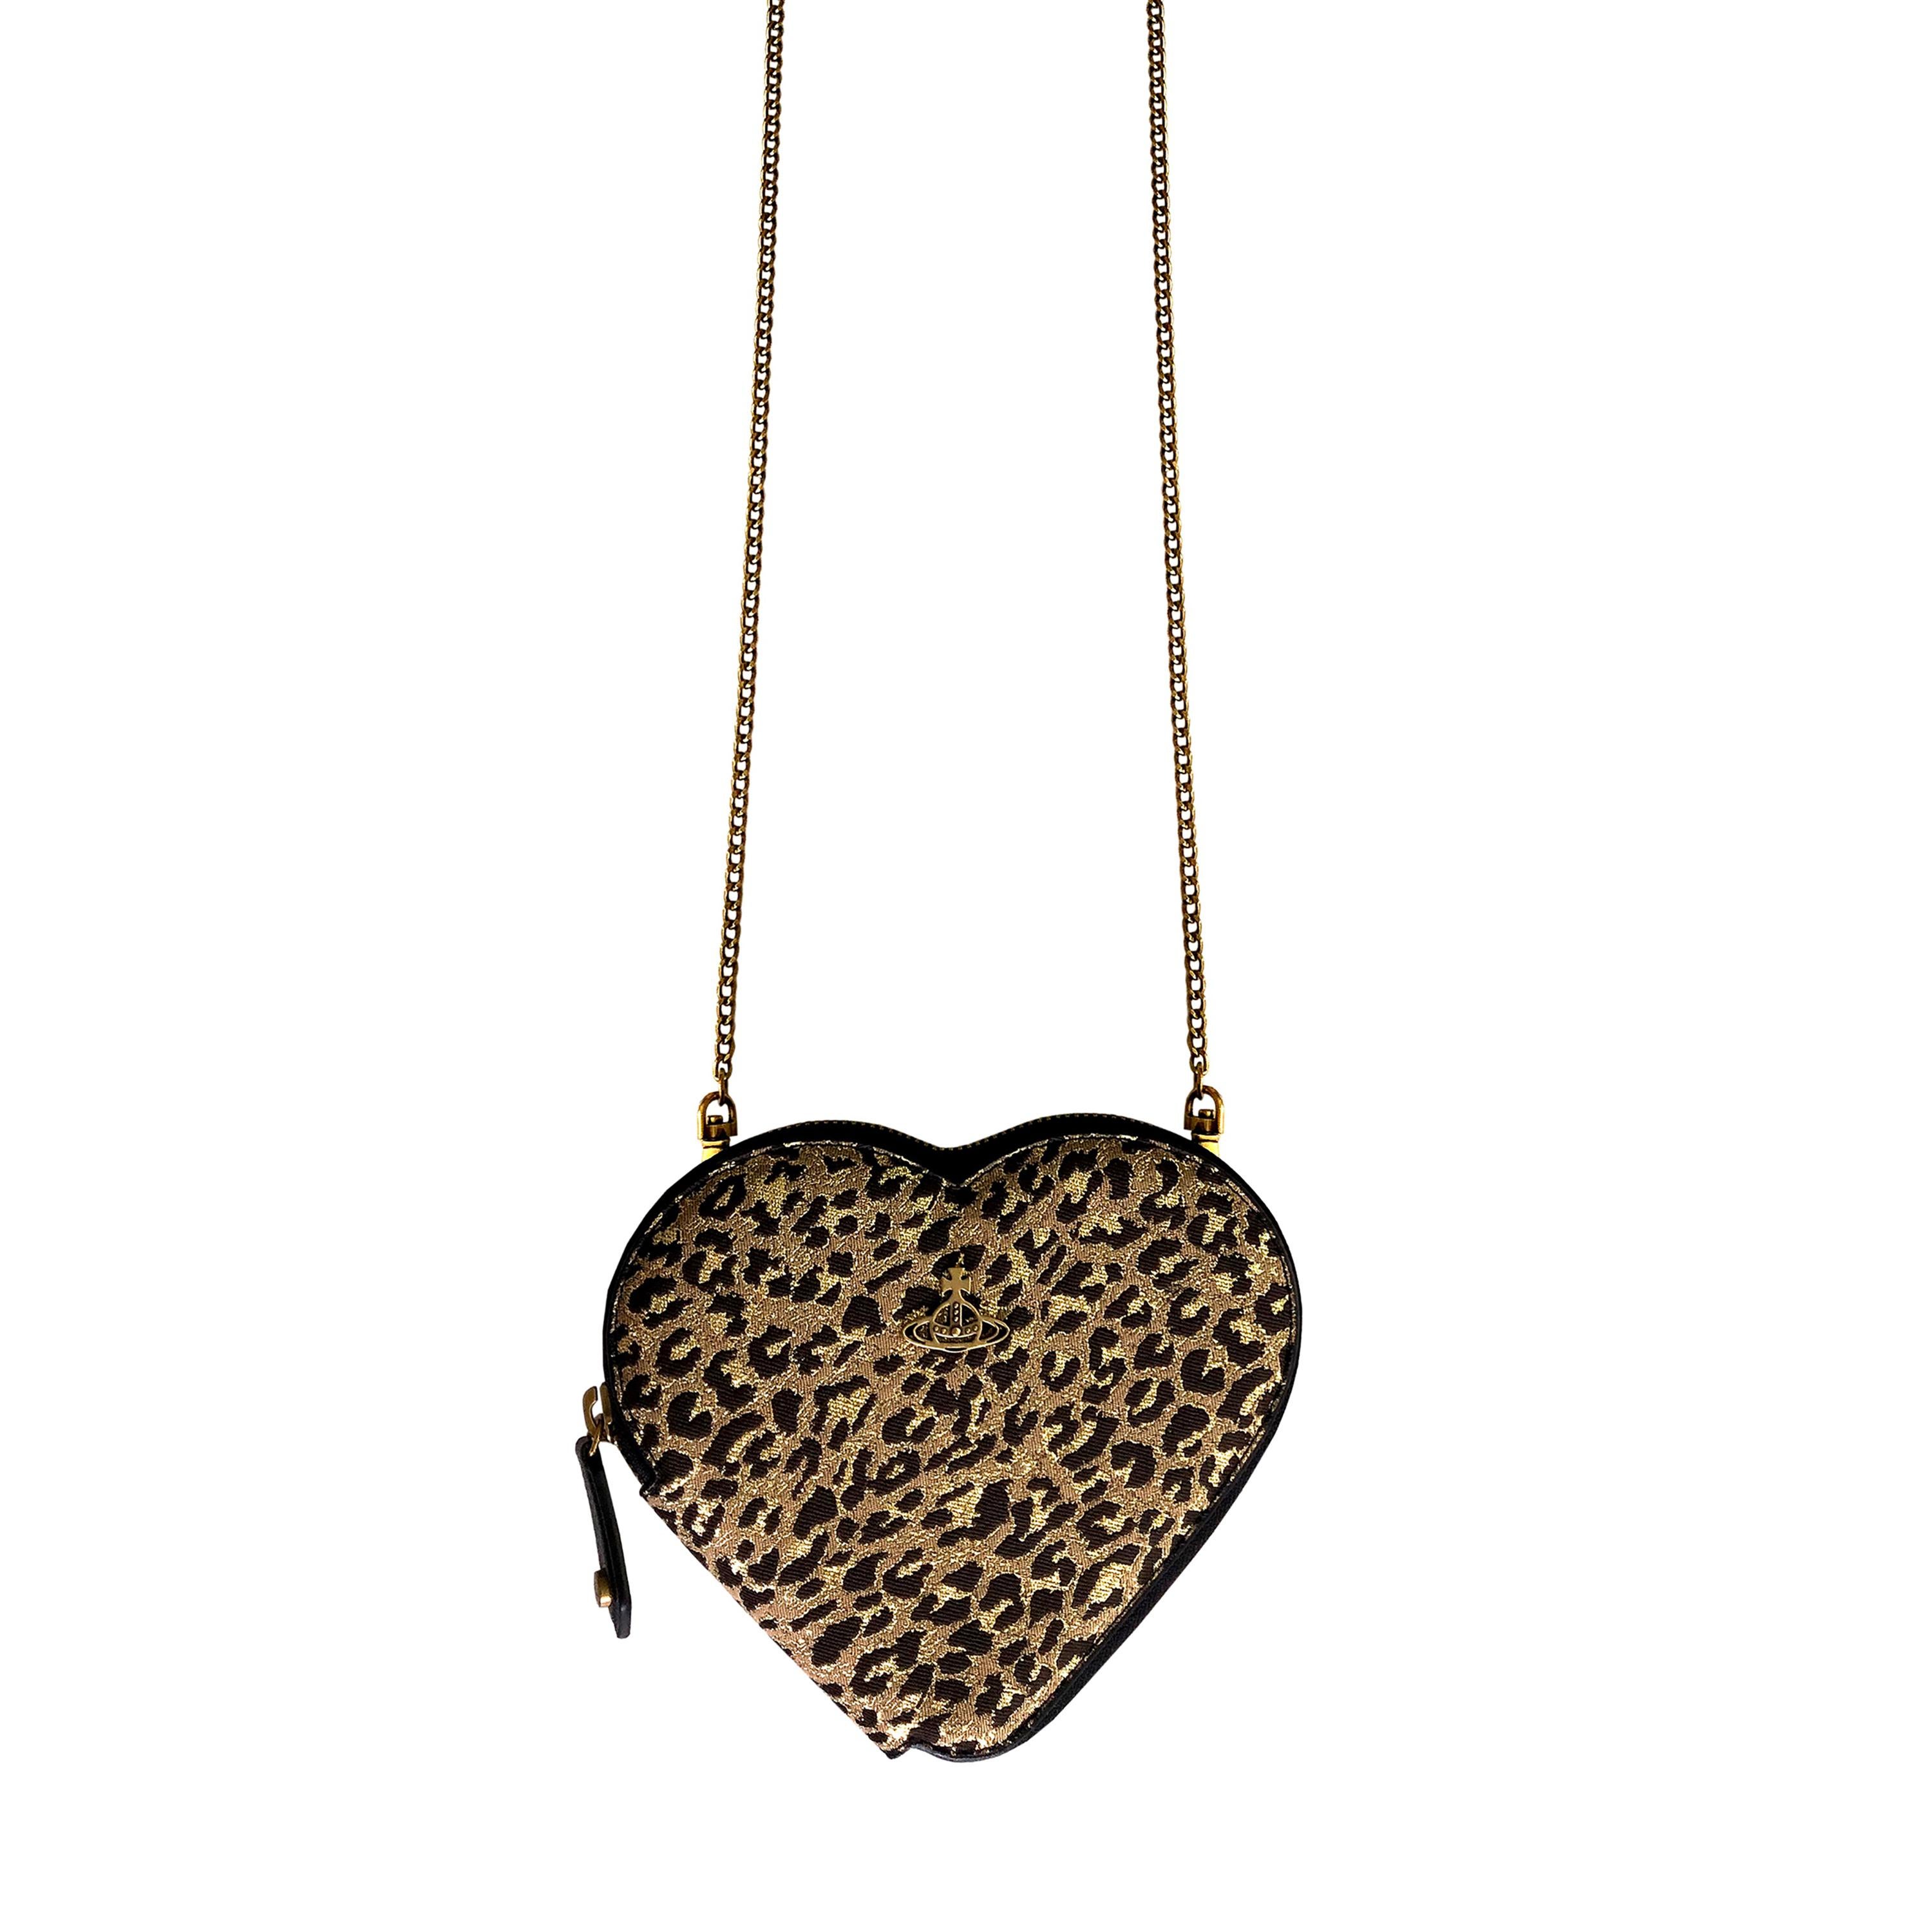 Product Details: Vivienne Westwood - Gold Leopard Jacquard Heart Crossbody Bag - Adjustable / Removable Brass Strap - Vegan - NEW With Tags - Spacious Interior - Satin ‘Orb’ Print Inner Lining - Etched ‘Orb’ Brass + Leather Outer Zip Pull